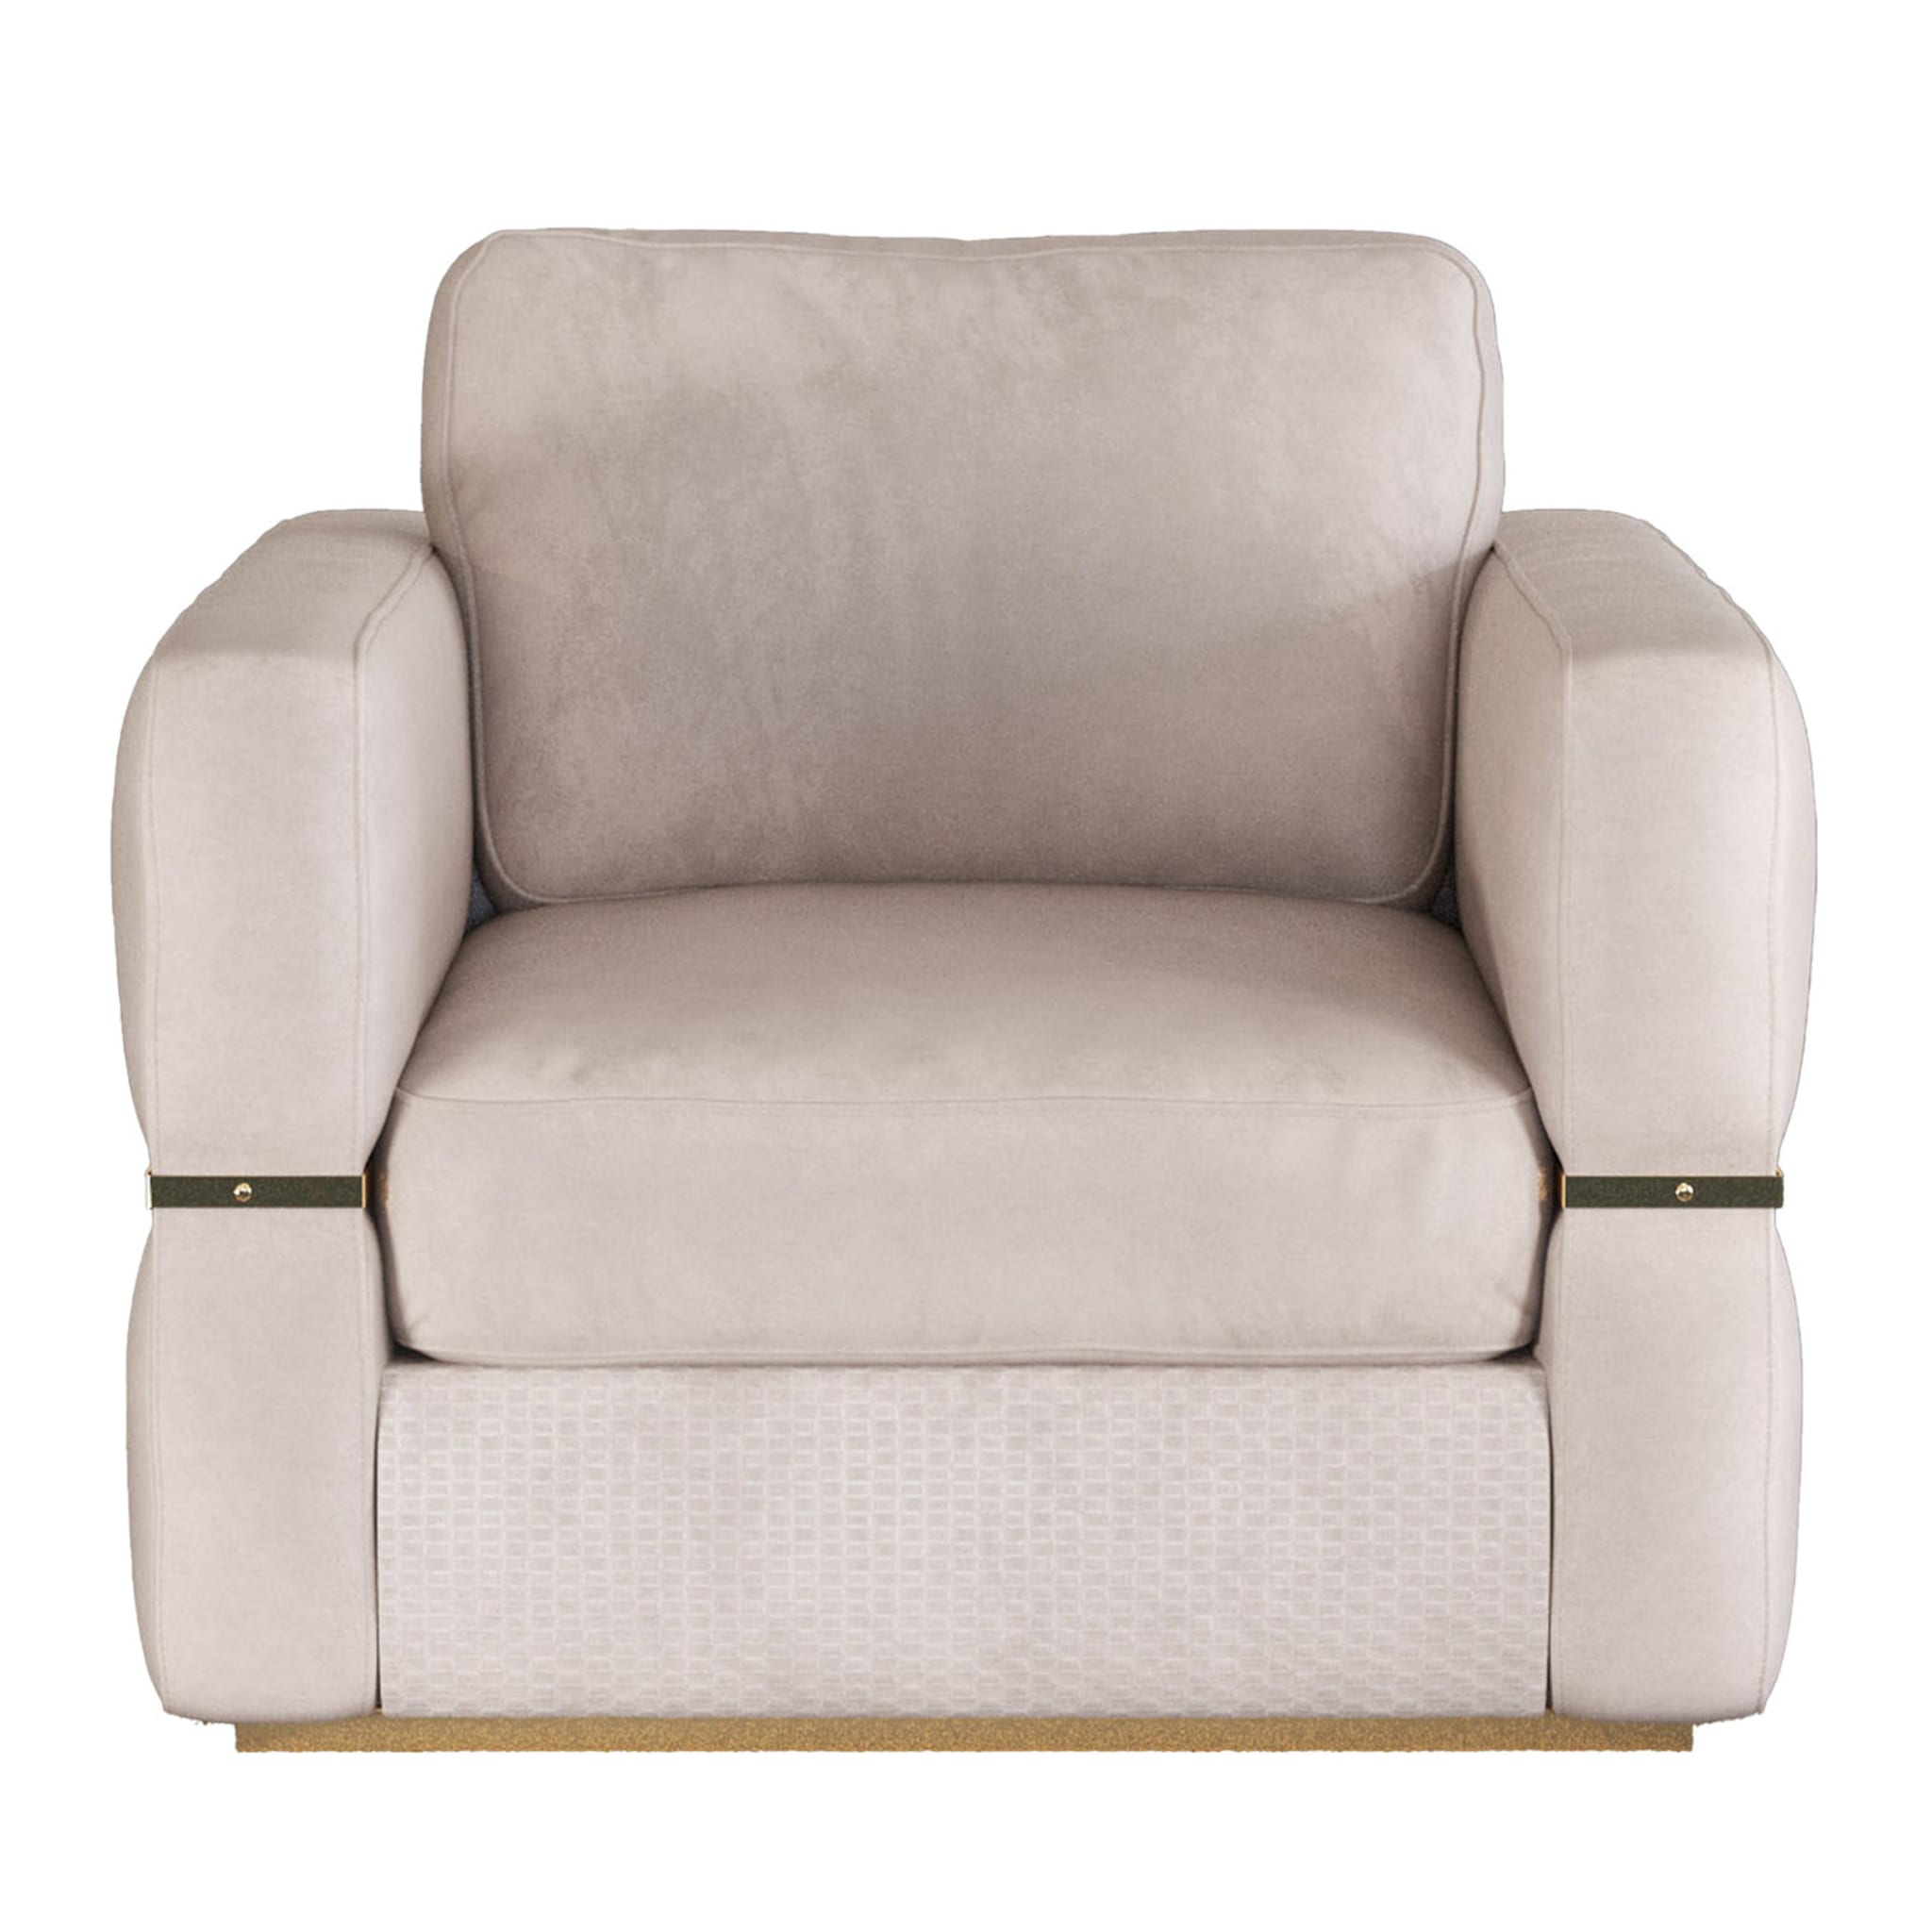 Ola Leather Armchair Cosmopolitan Collection - Main view